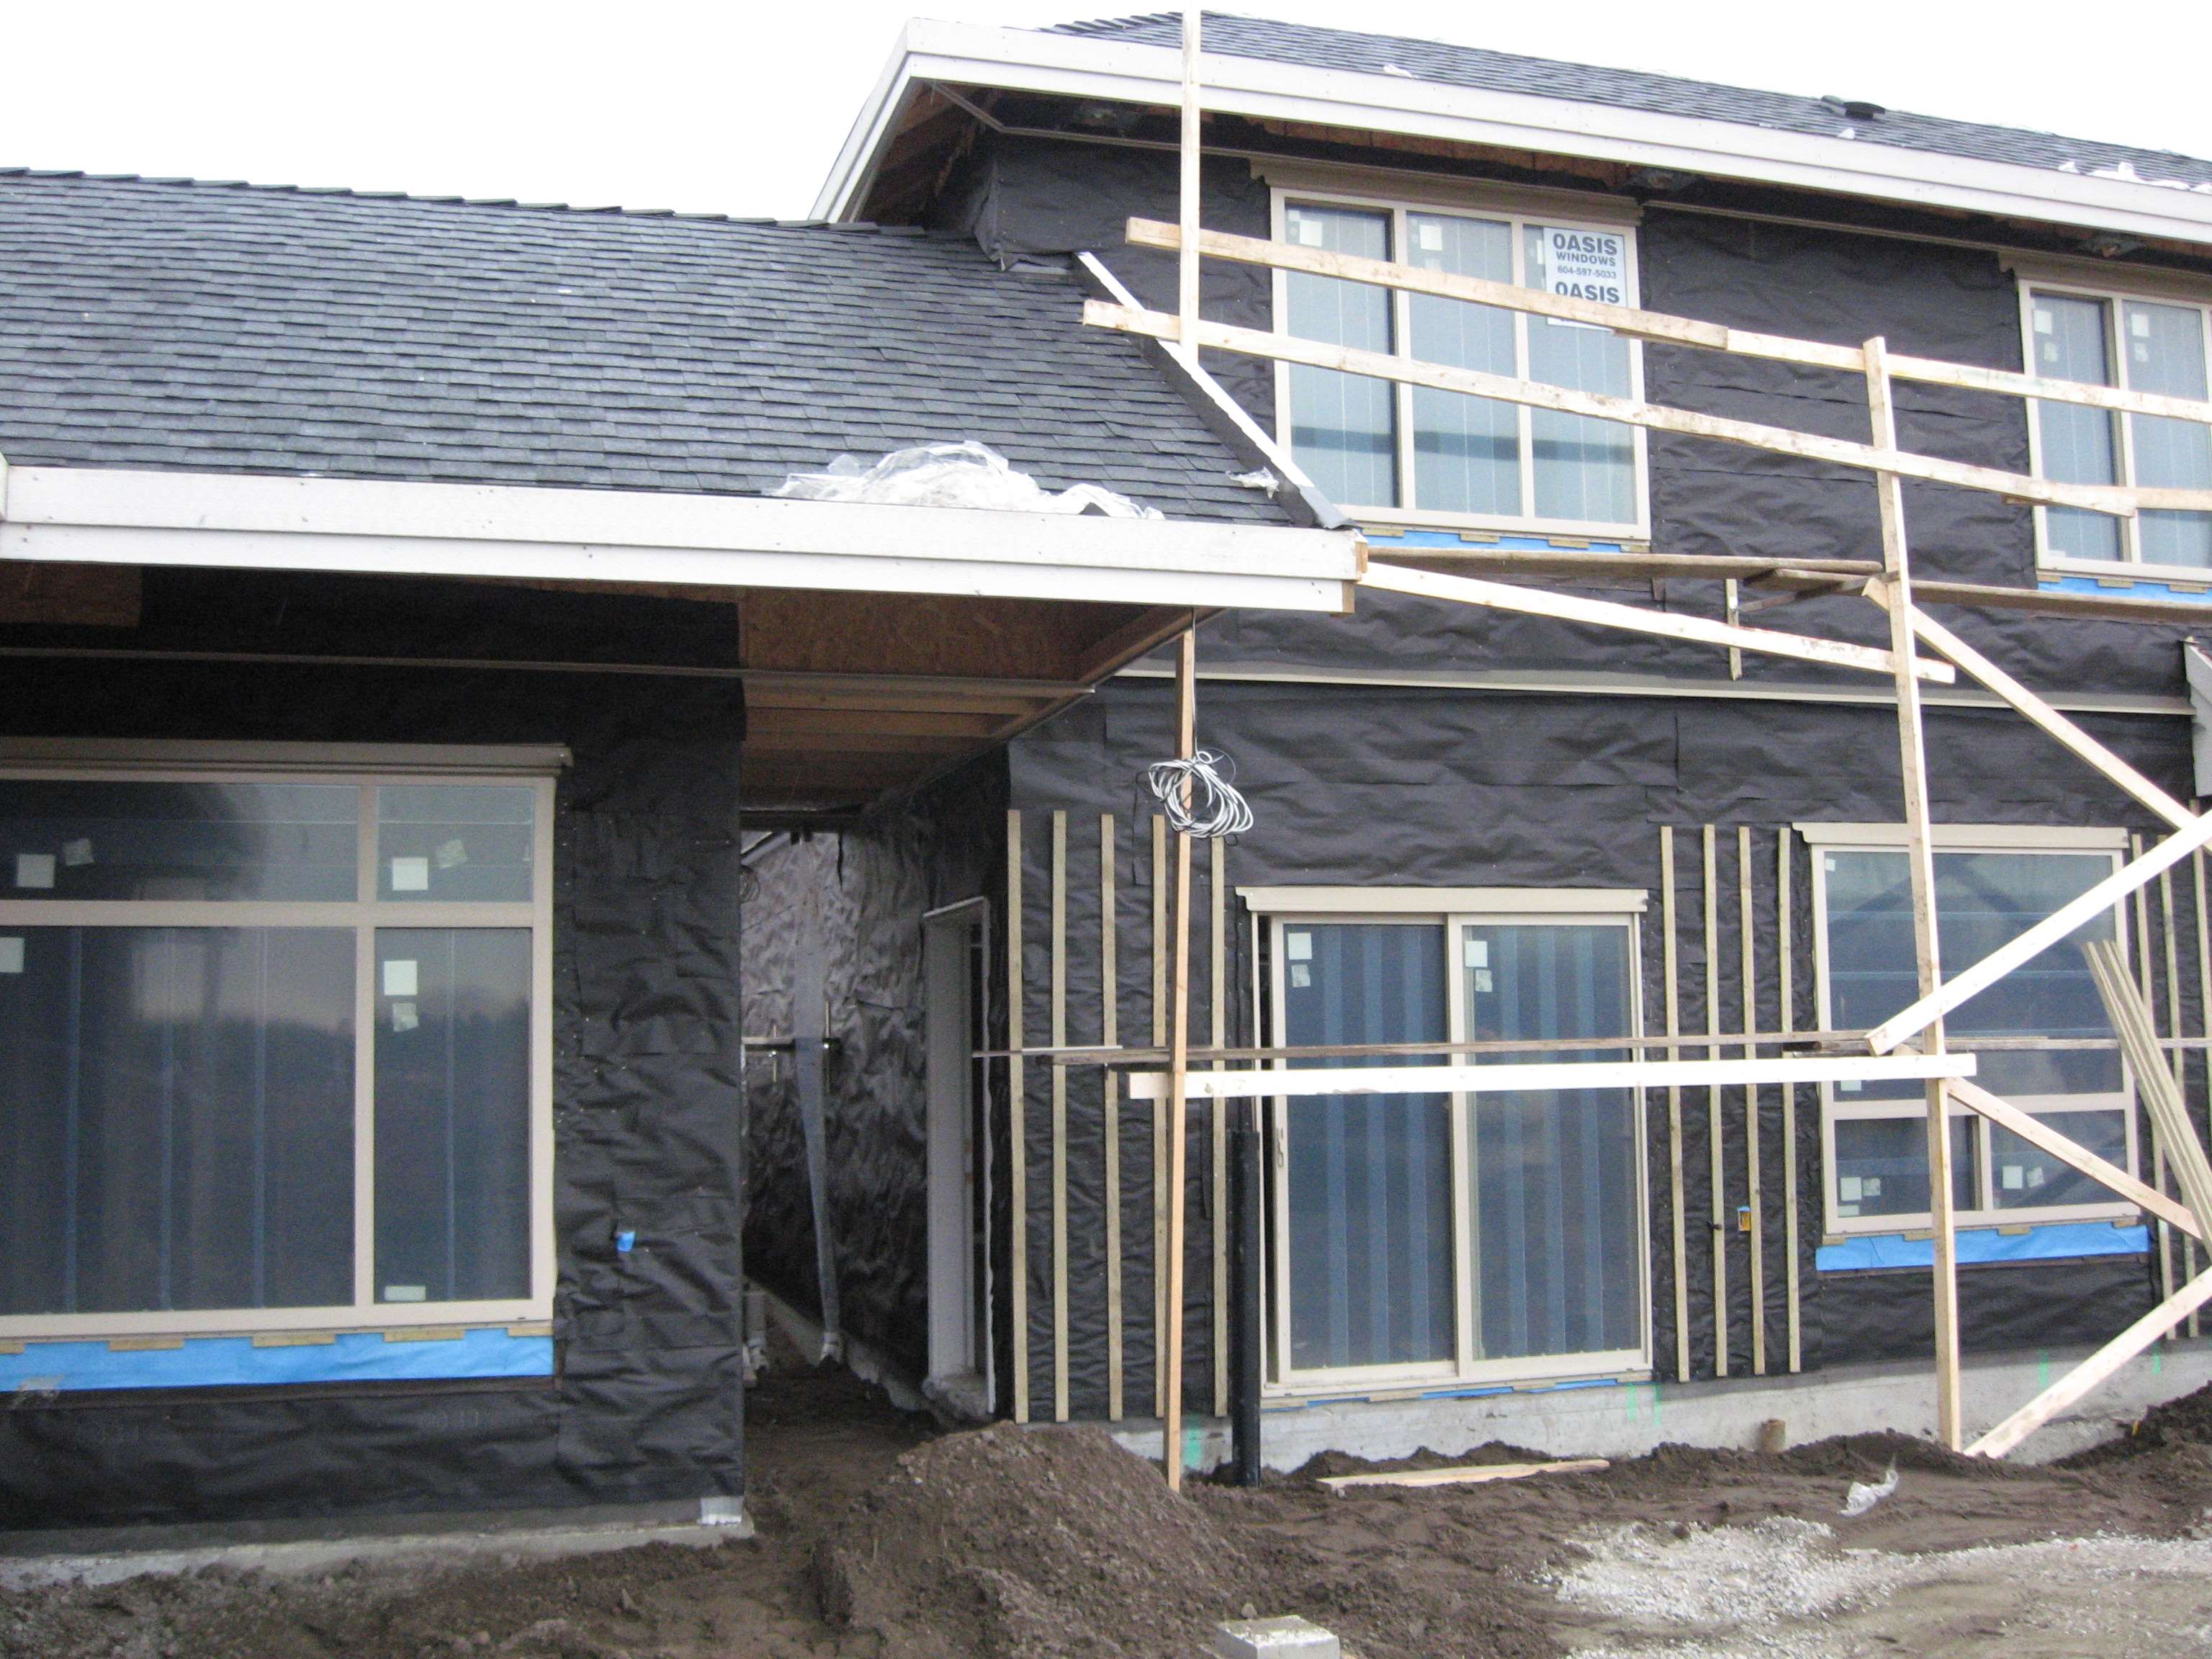 Home Building and Renovation